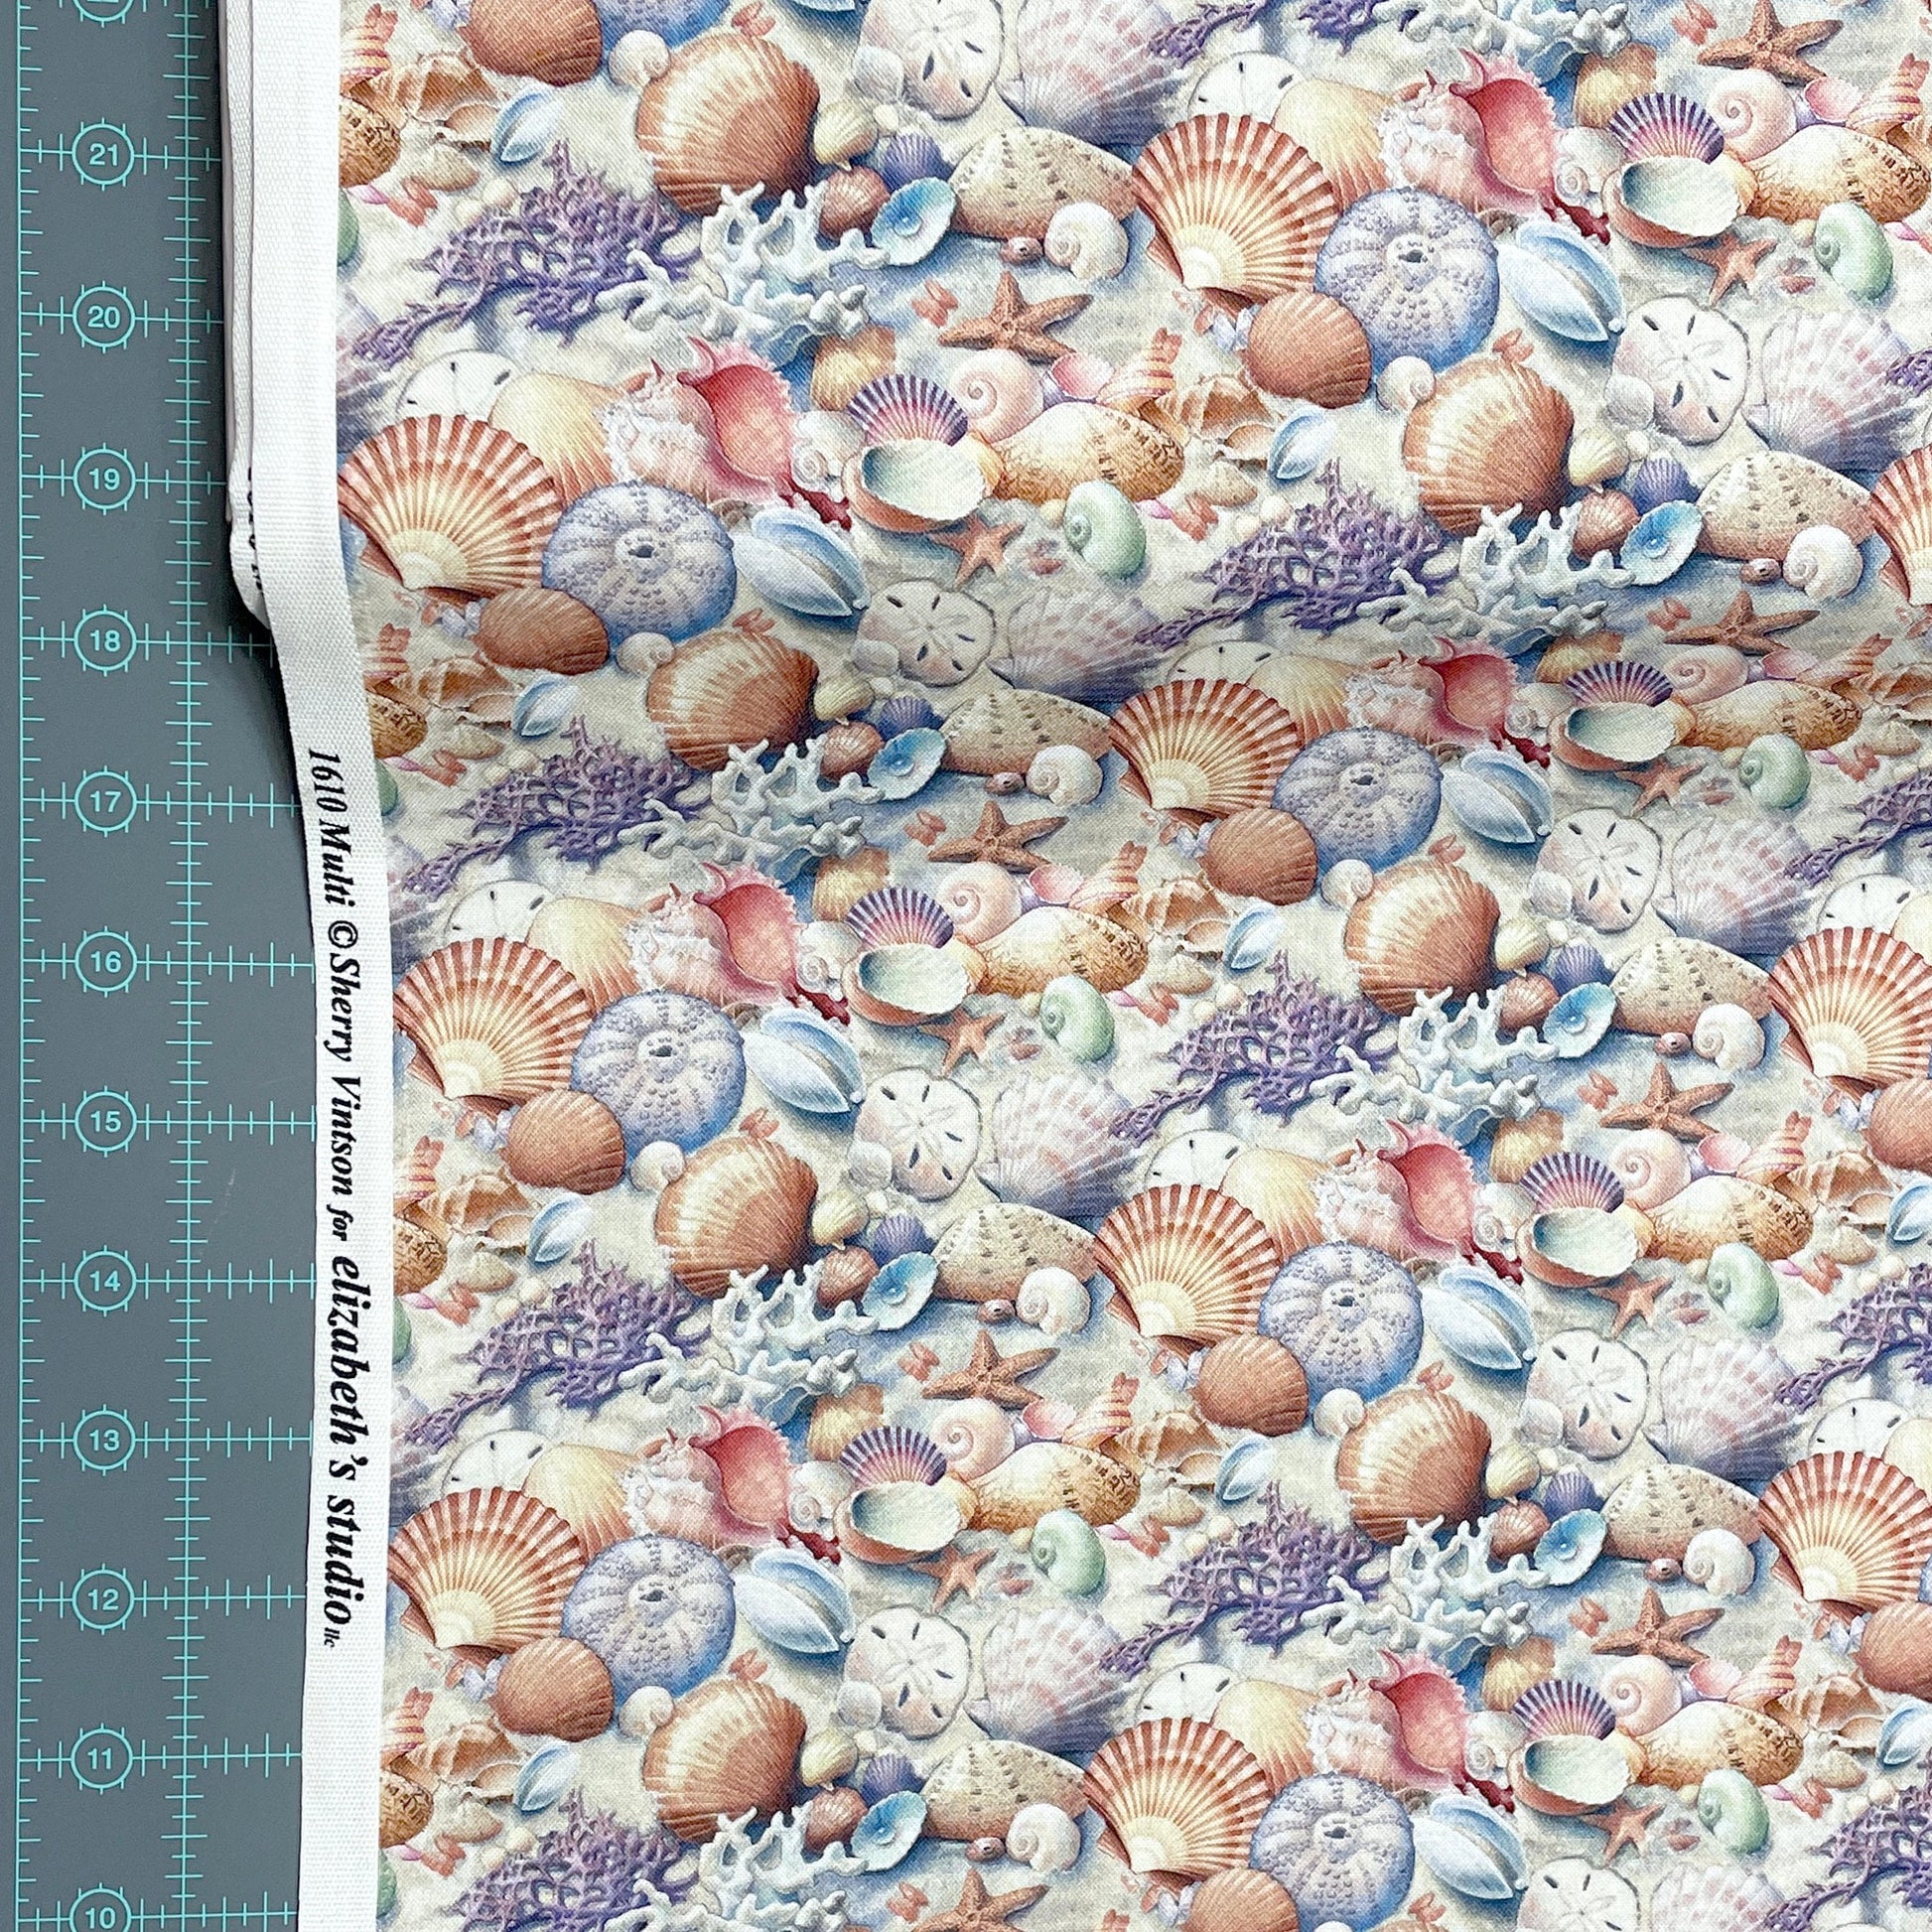 Shell Fabric - Race to Safety - 100% Cotton - Elizabeth's Studio - Beach Ocean Starfish Sea Life Tropical Vacation Scuba Diving Swimming